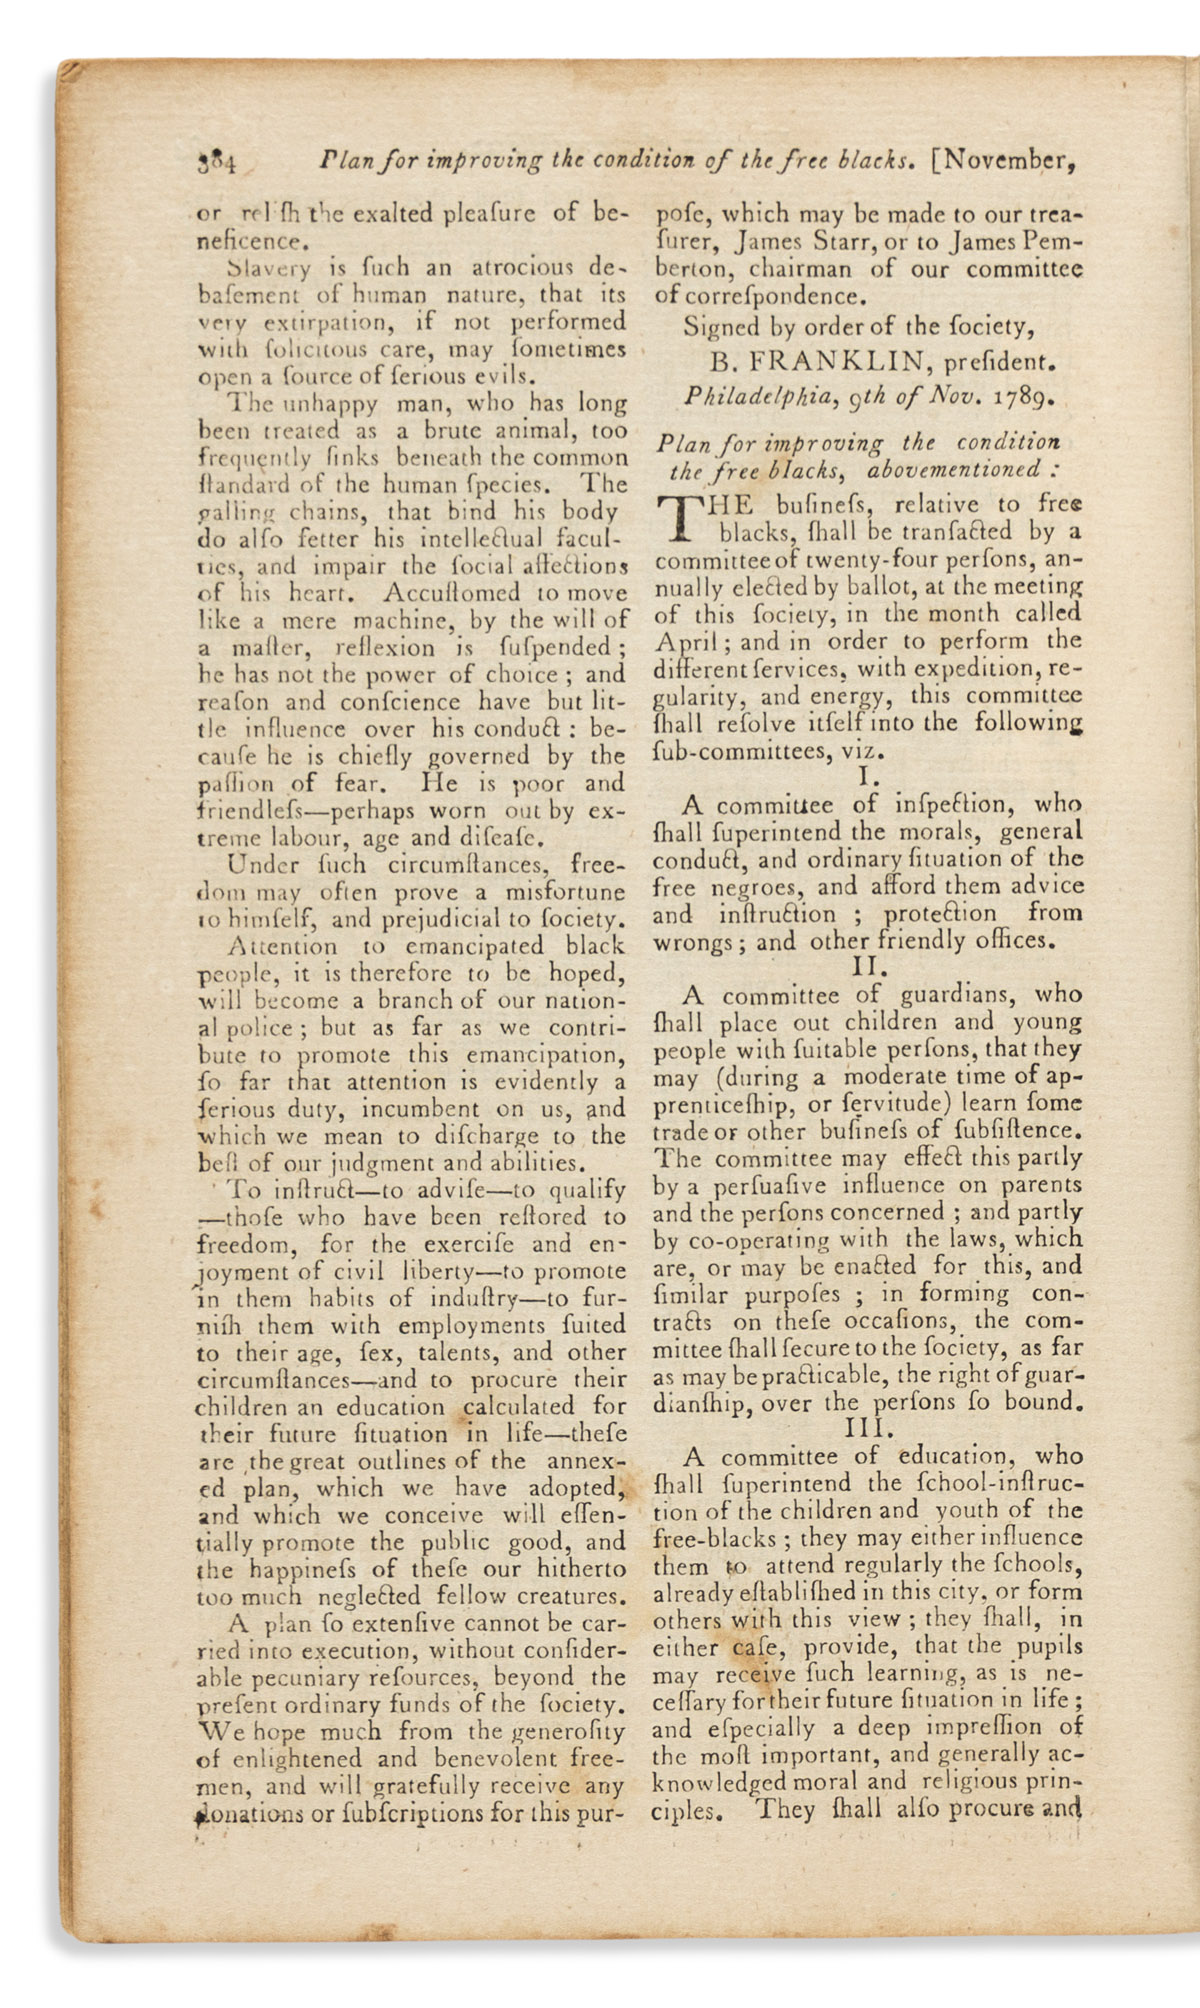 (SLAVERY & ABOLITION.) Issue of the magazine American Museum containing an address on slavery by Benjamin Franklin.